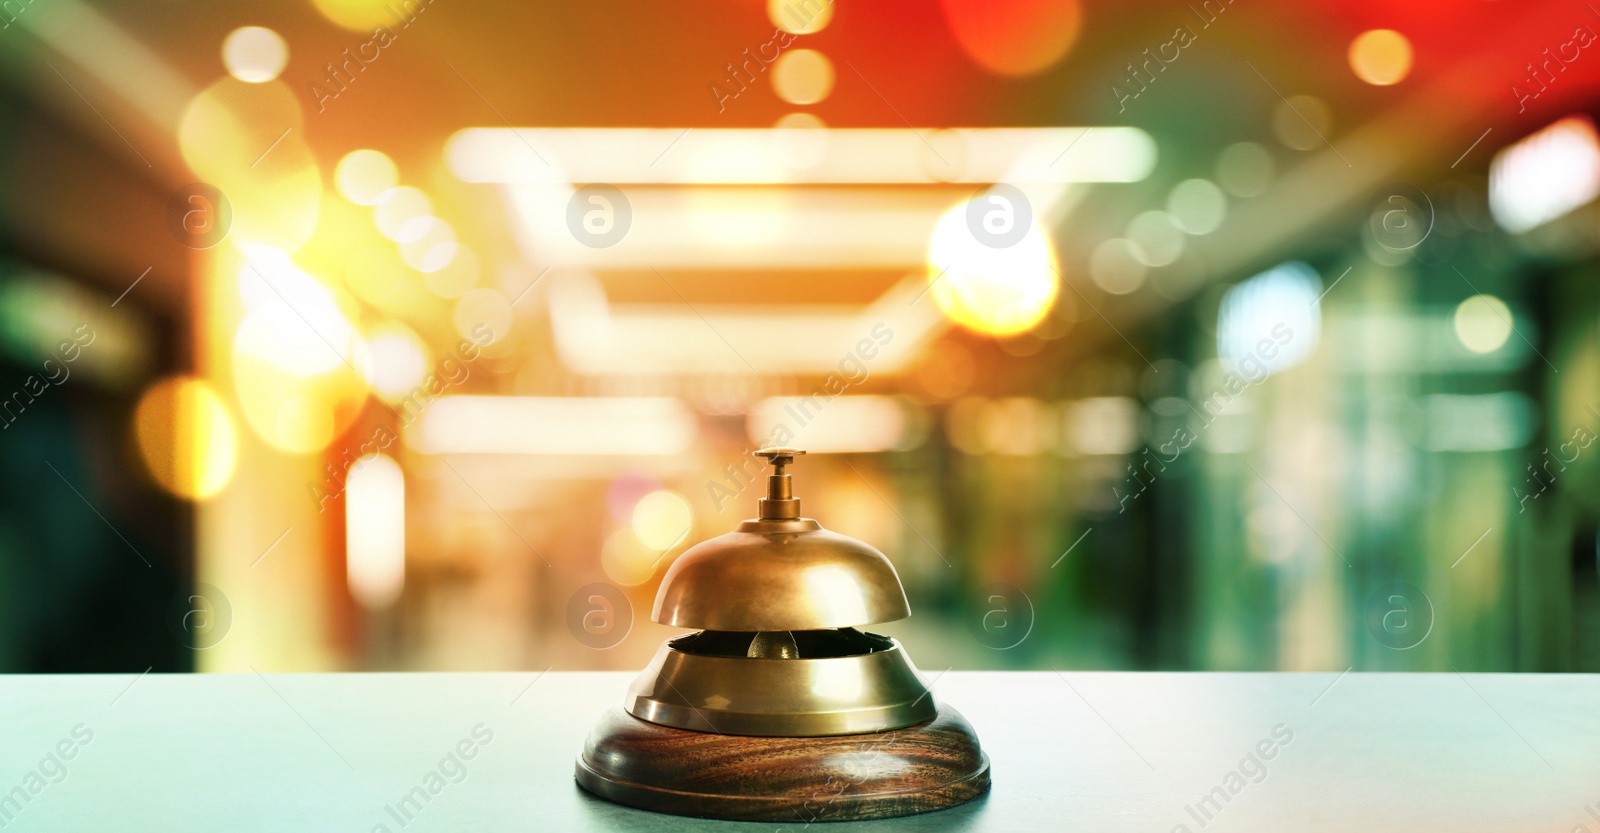 Image of Light table with hotel service bell on blurred background. Banner design